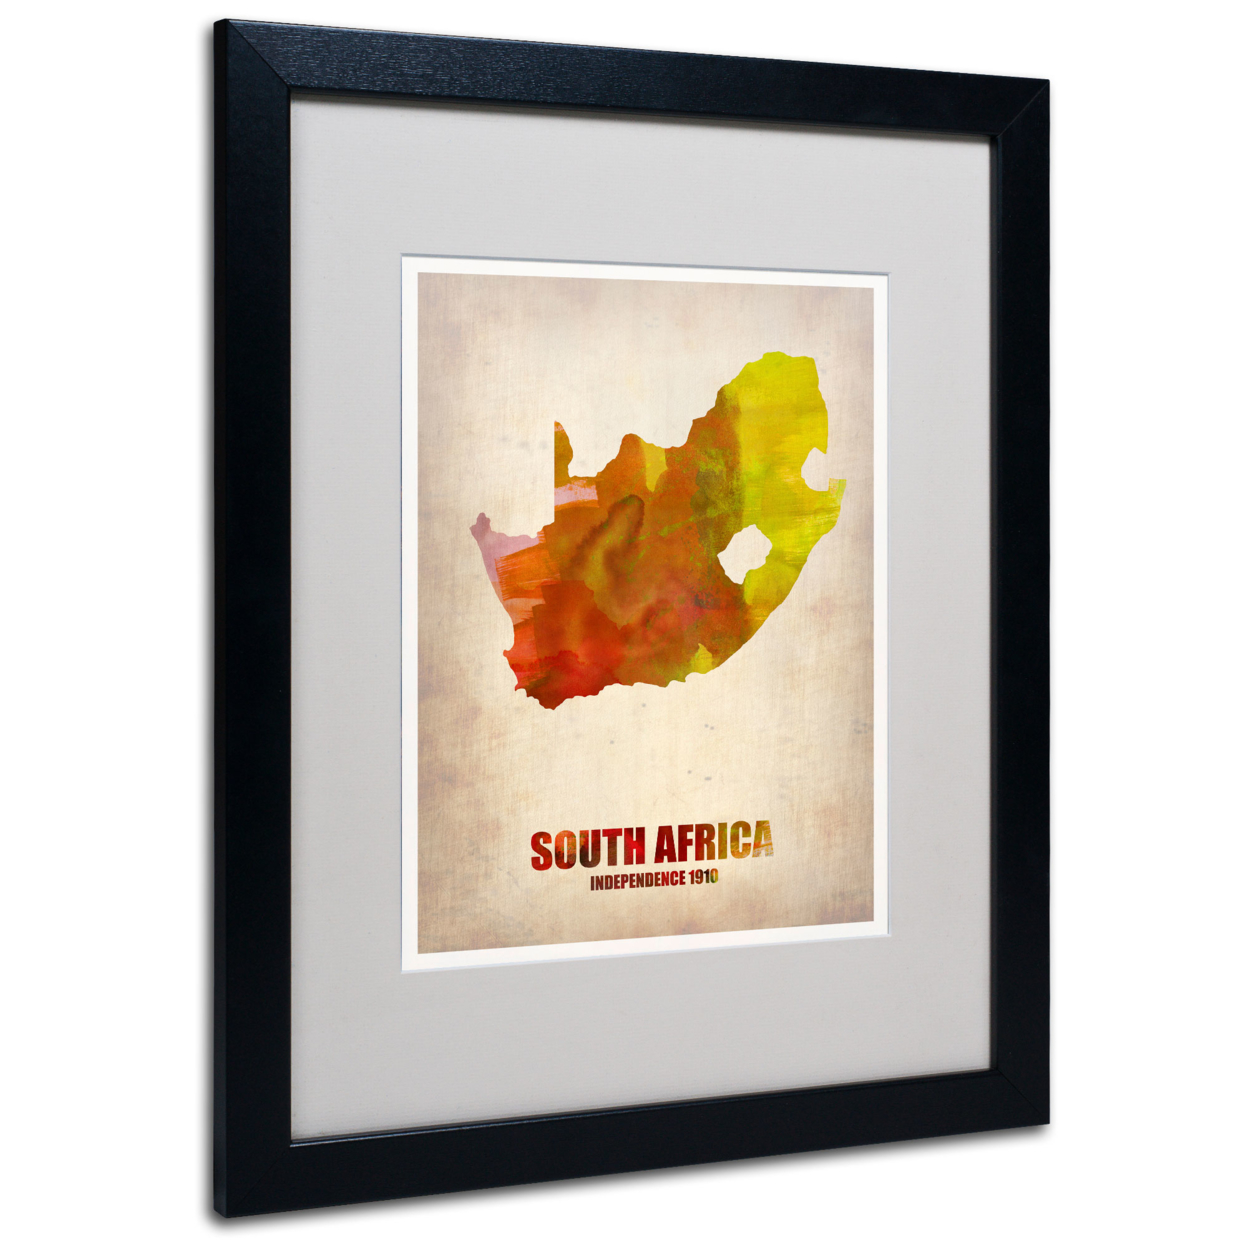 Naxart 'South Africa Watercolor Map' Black Wooden Framed Art 18 X 22 Inches